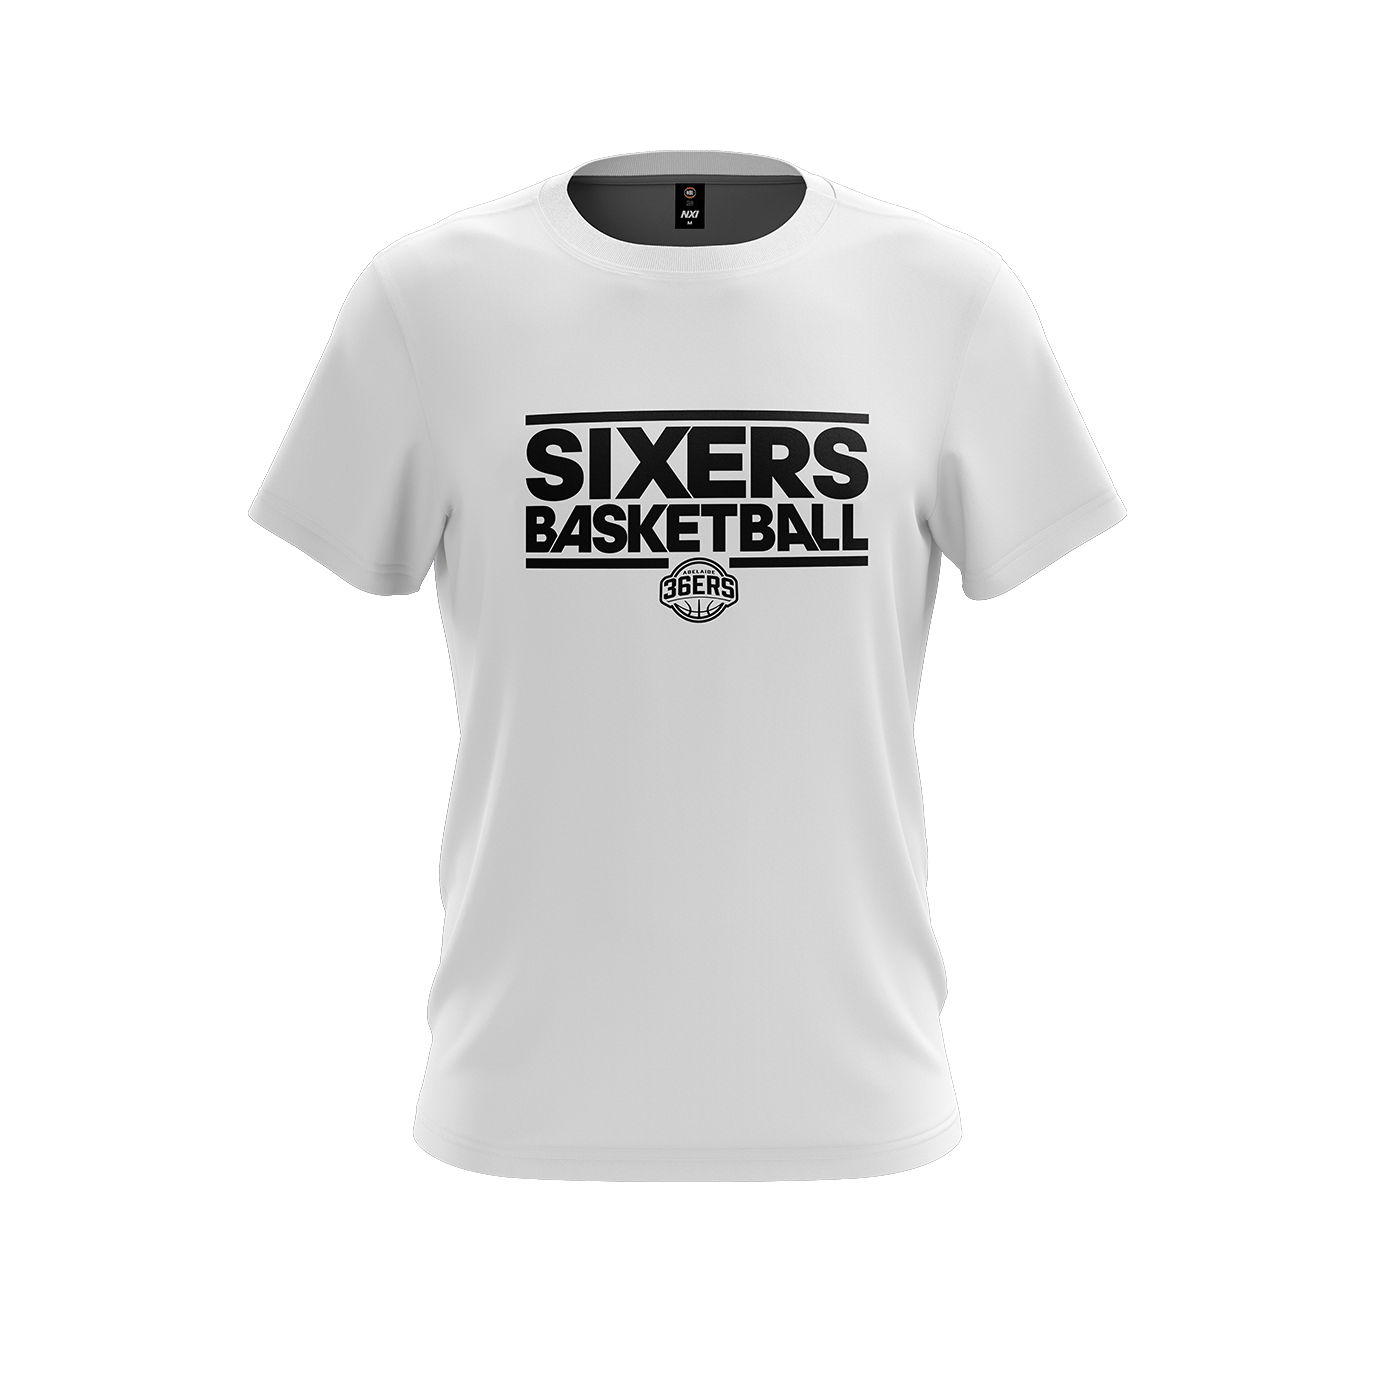 Sixers Basketball Essentials Youth Tee